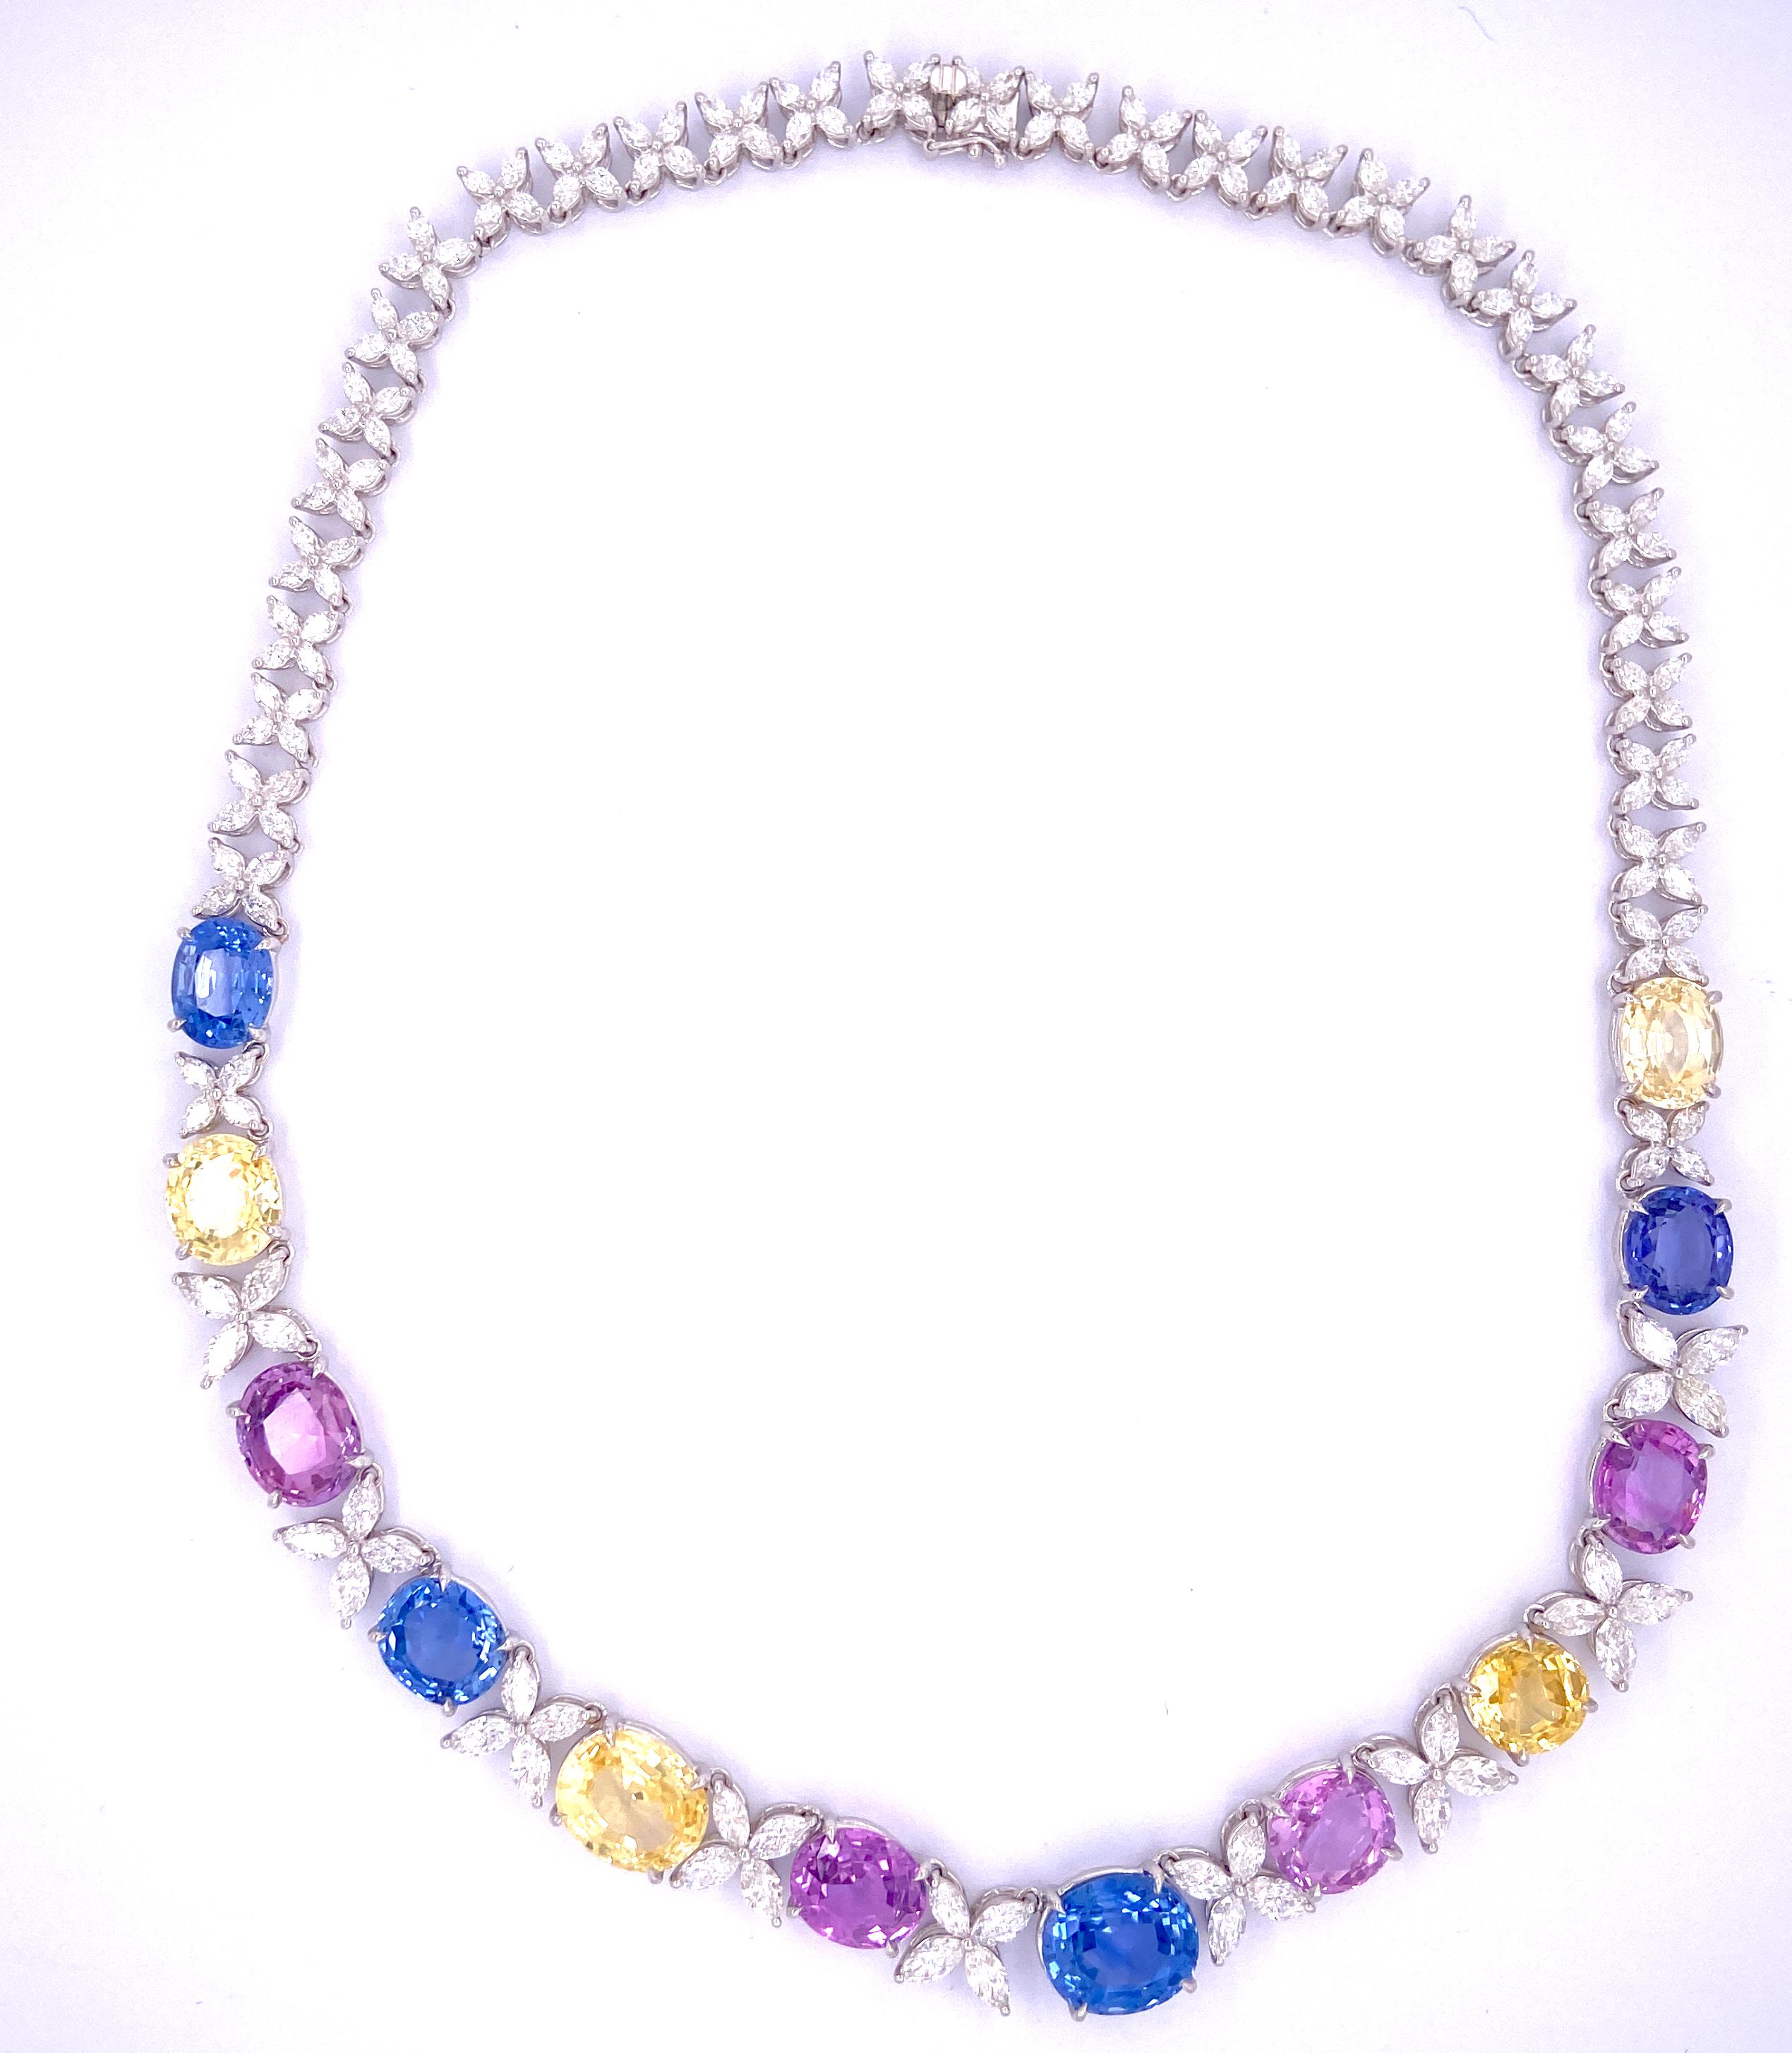 71.49 Carat GIA Certified No Heat Fancy Coloured Sapphires and White Diamond Gold Necklace:

A rare and beautiful necklace, it features incredibly gorgeous 71.49 carat unheated fancy coloured sapphires along with white marquise shaped diamonds